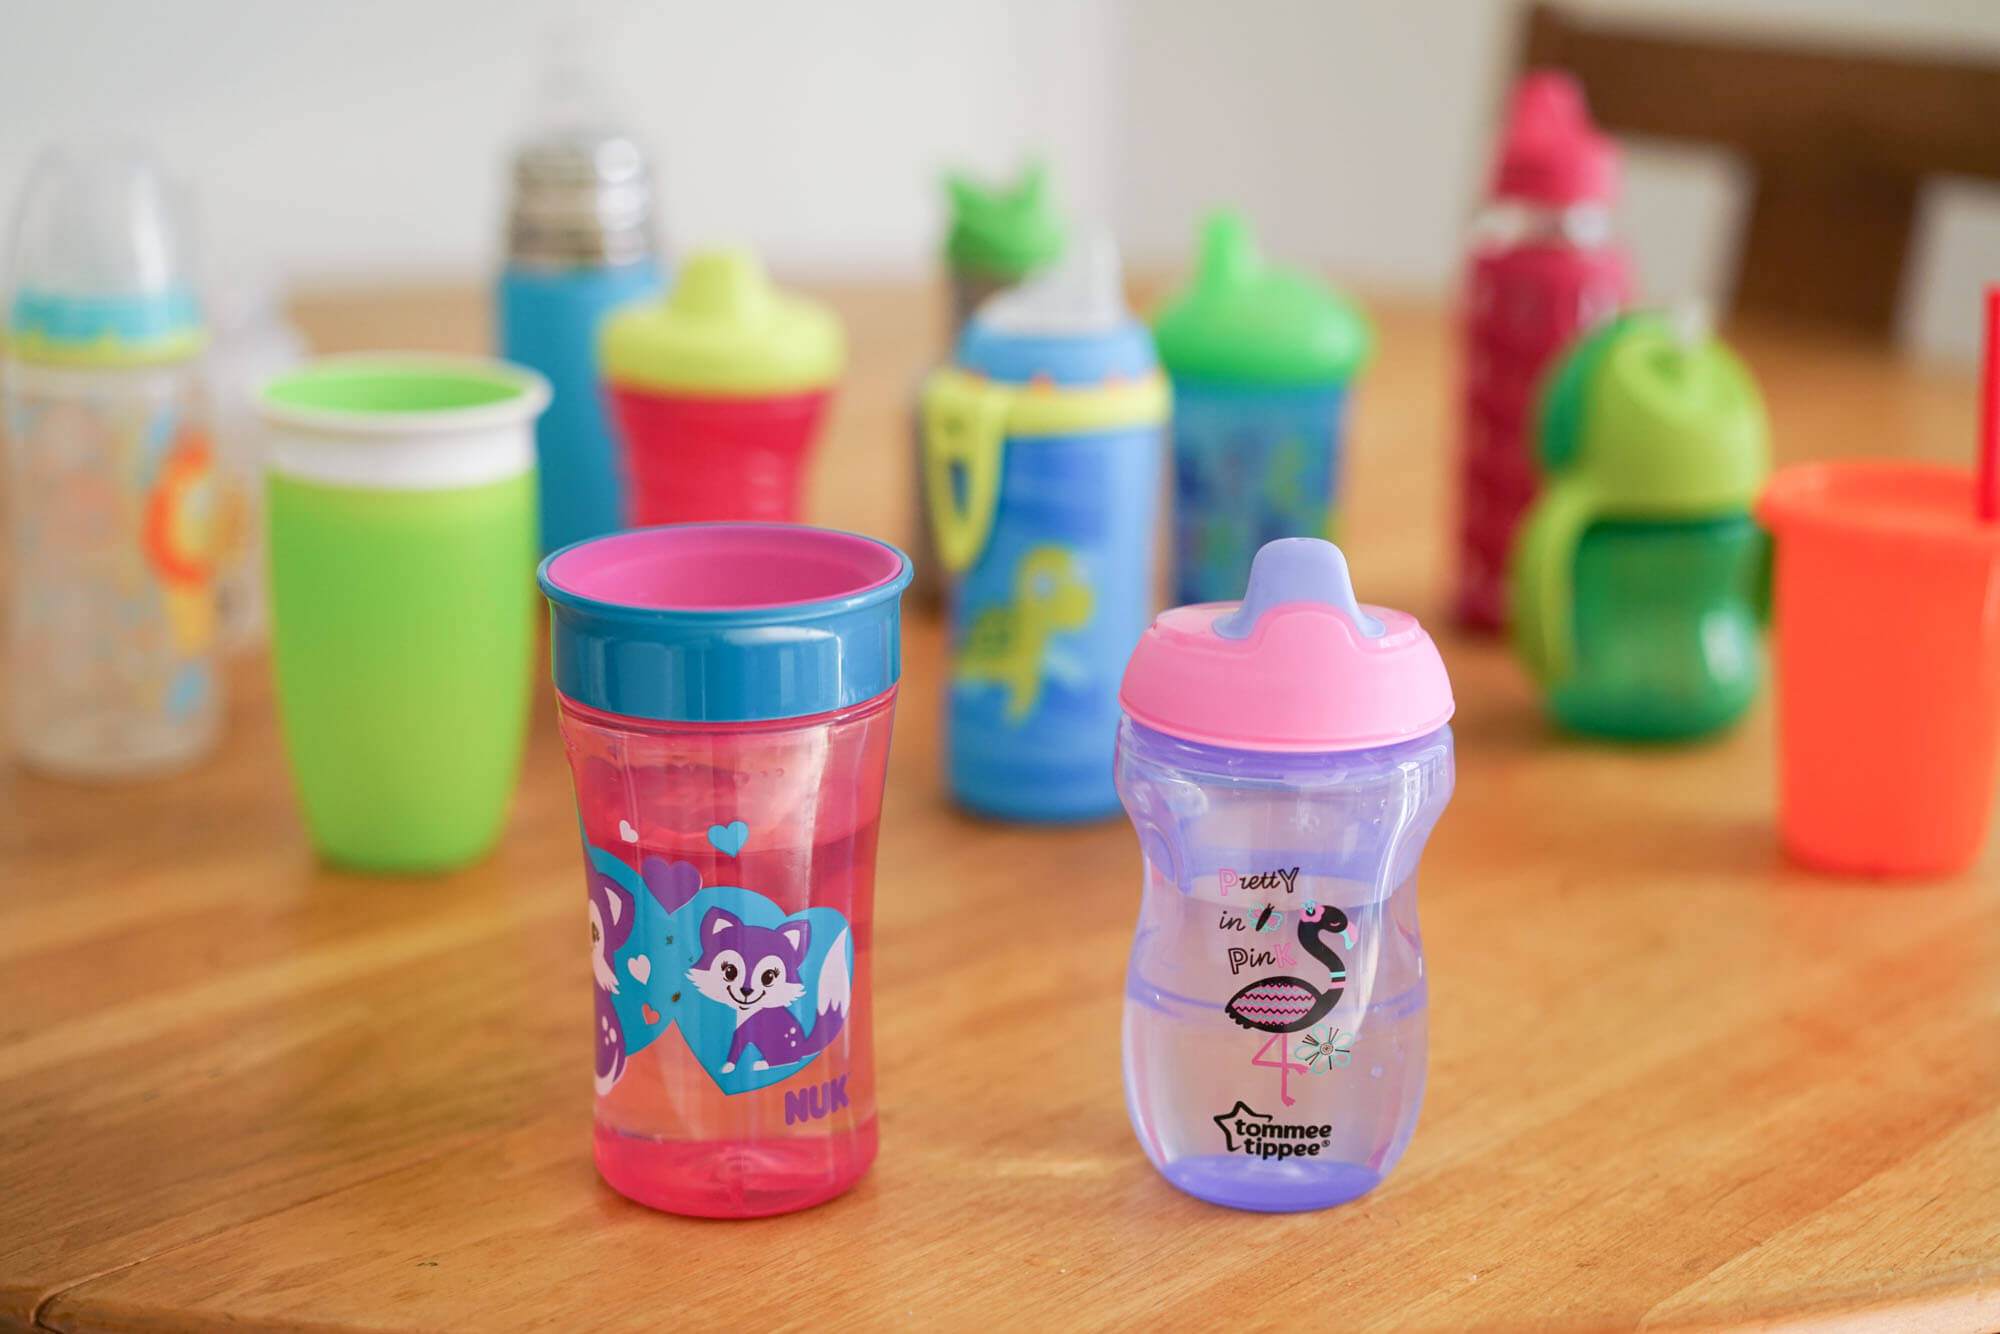 Should a 2 year old drink from a sippy cup? – Minaym